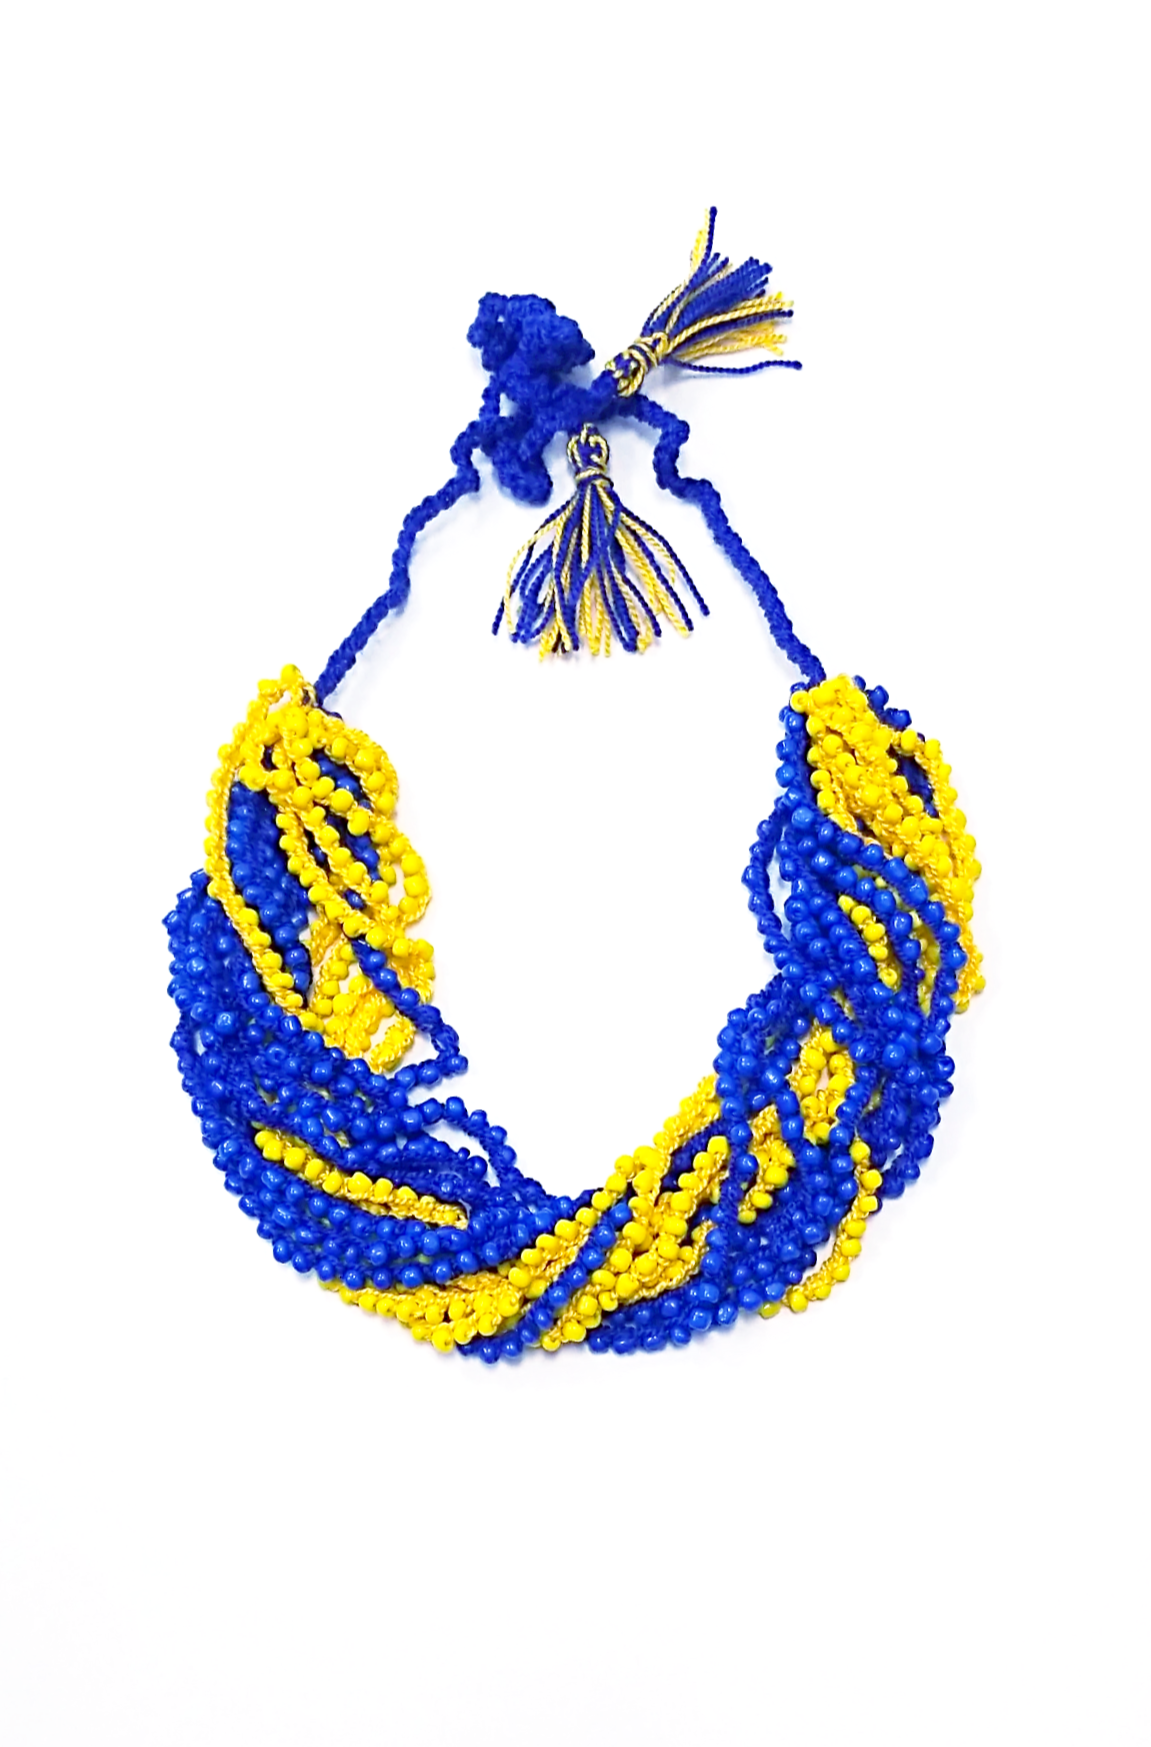 Artisan crafted woven bead necklace. Royal blue and yellow